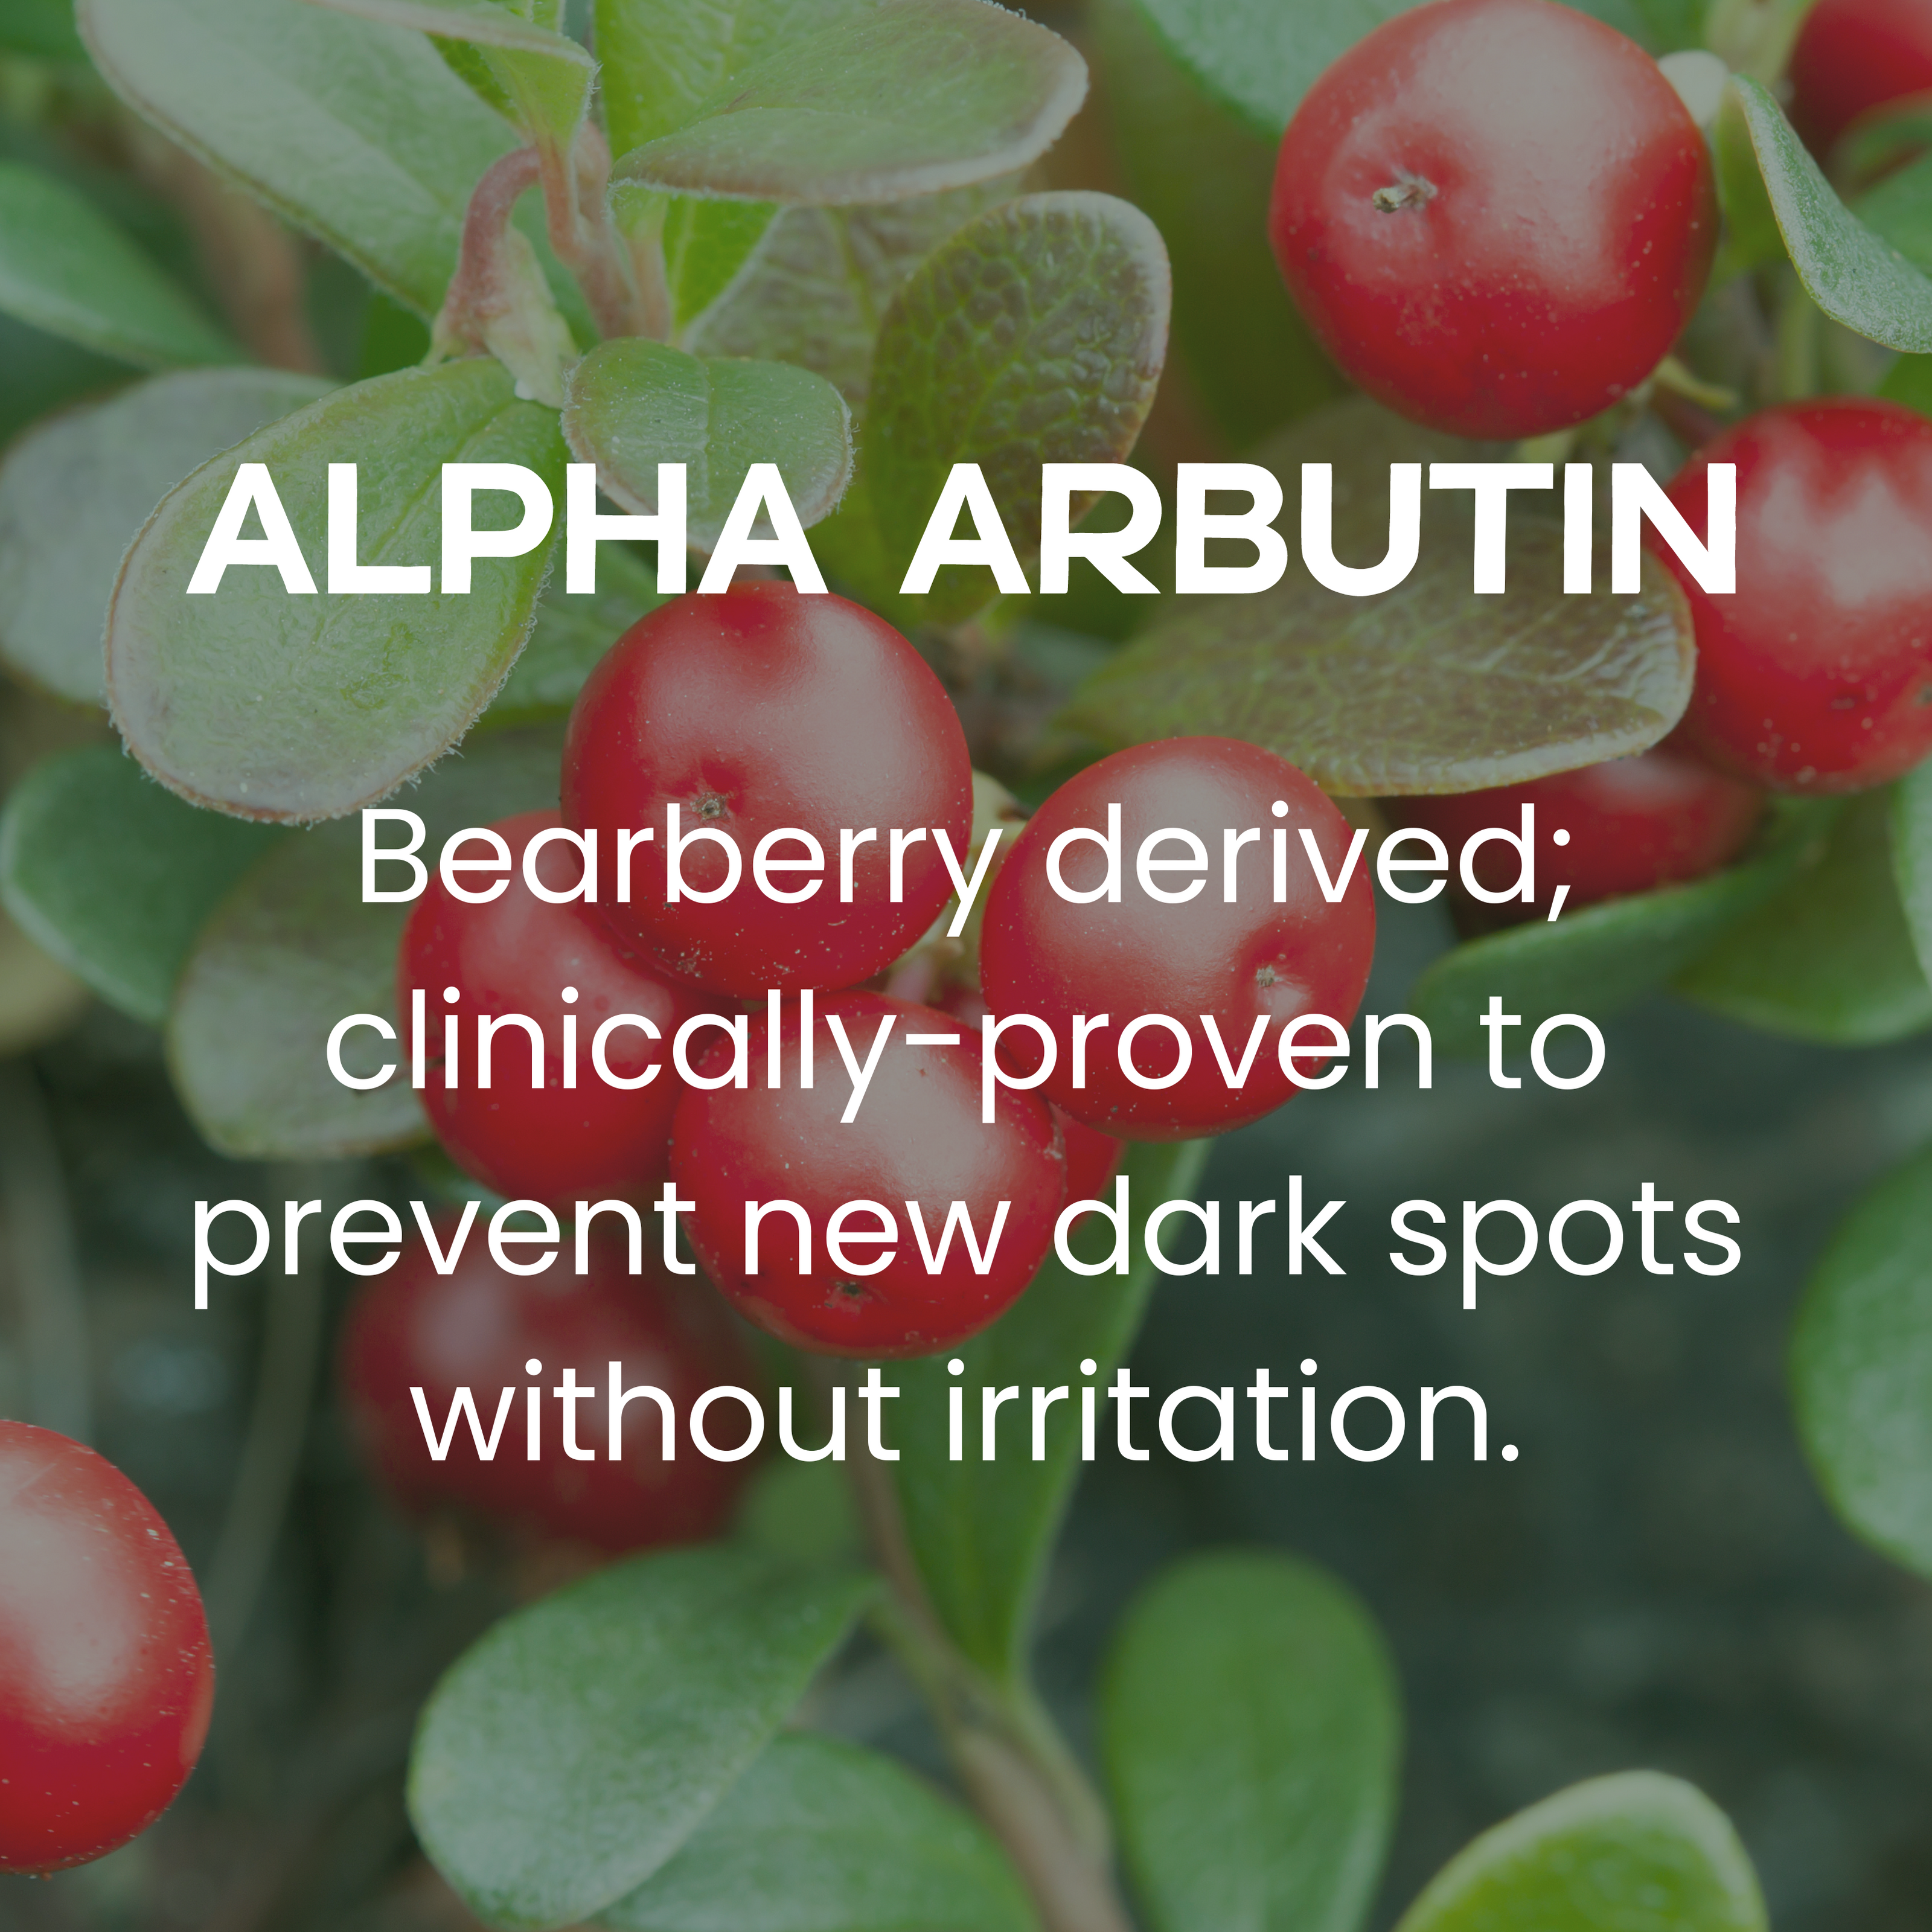 Alpha Arbutin Ingredient Breakdown - Bearberry-derived; clinically-proven to prevent new dark spots without irritation.